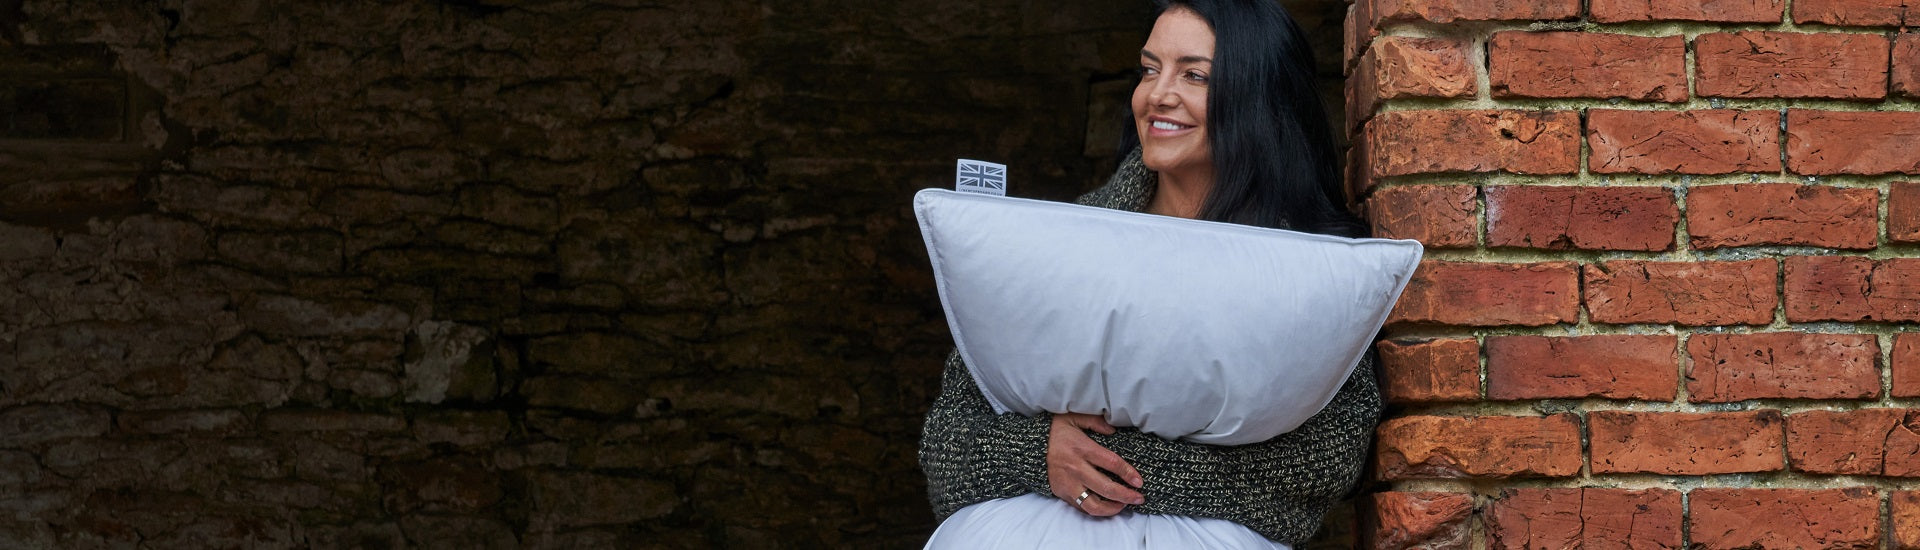 natural pillows | feather pillows | feather and down pillows by Linen Cupboard Yorkshire